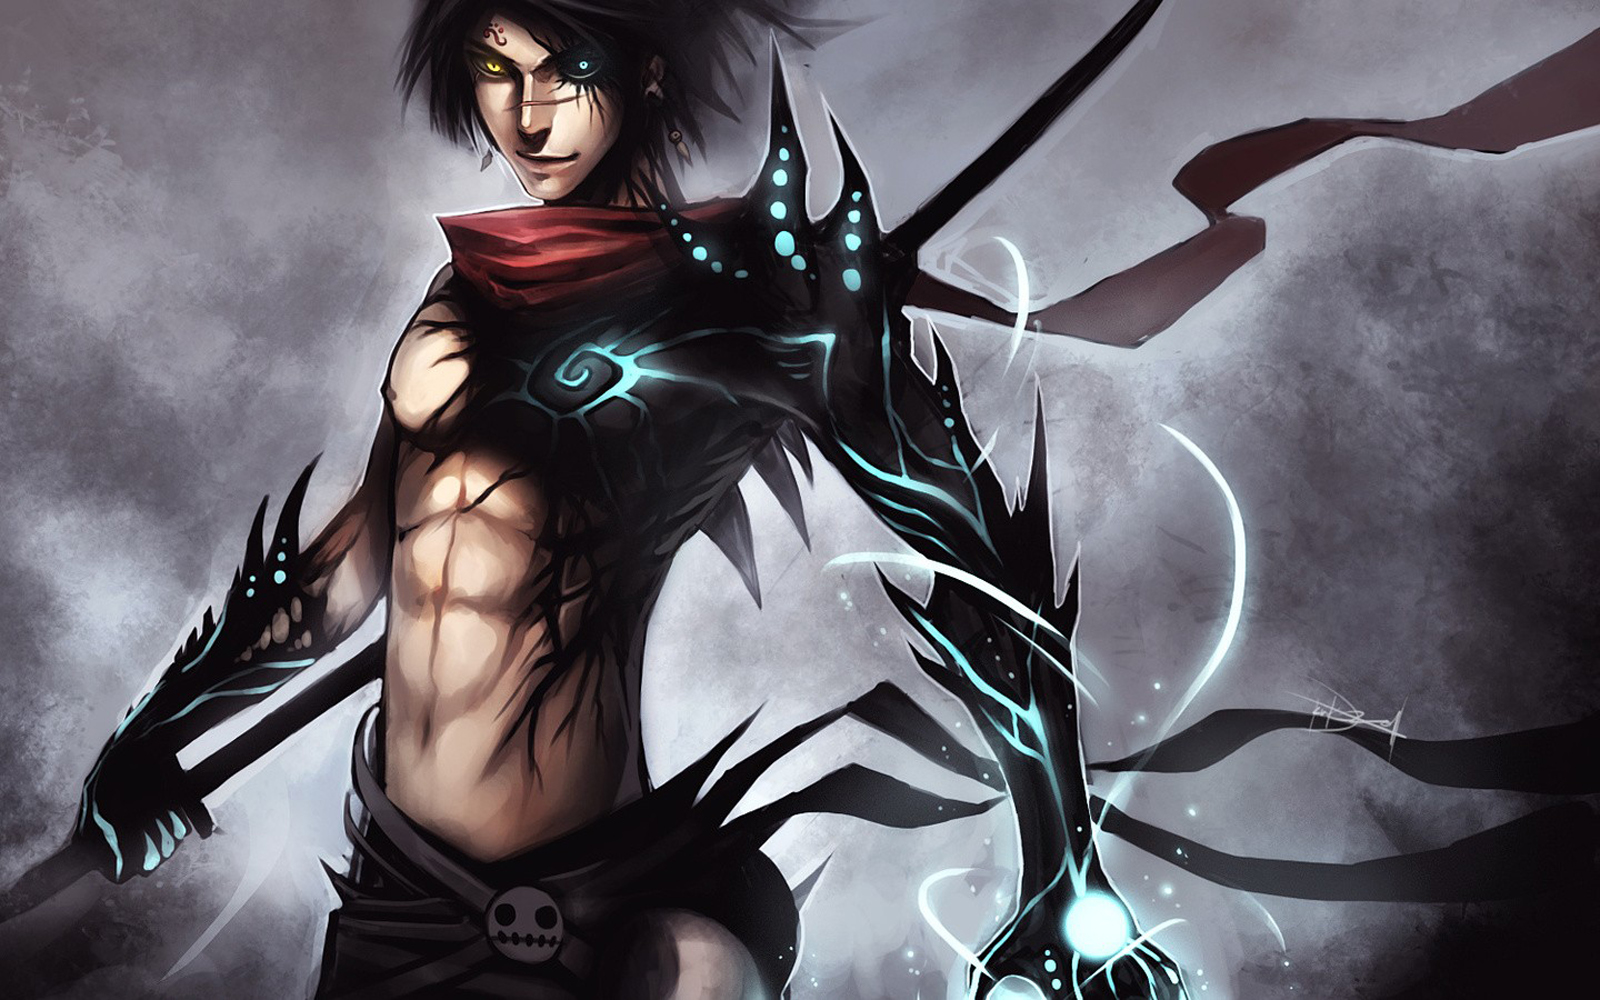 Warrior+Abs+Scar+Bicolor+Weapon+Male+Anime+HD+Wallpaper+Backgrounds+Photo+Image+Picture.jpg